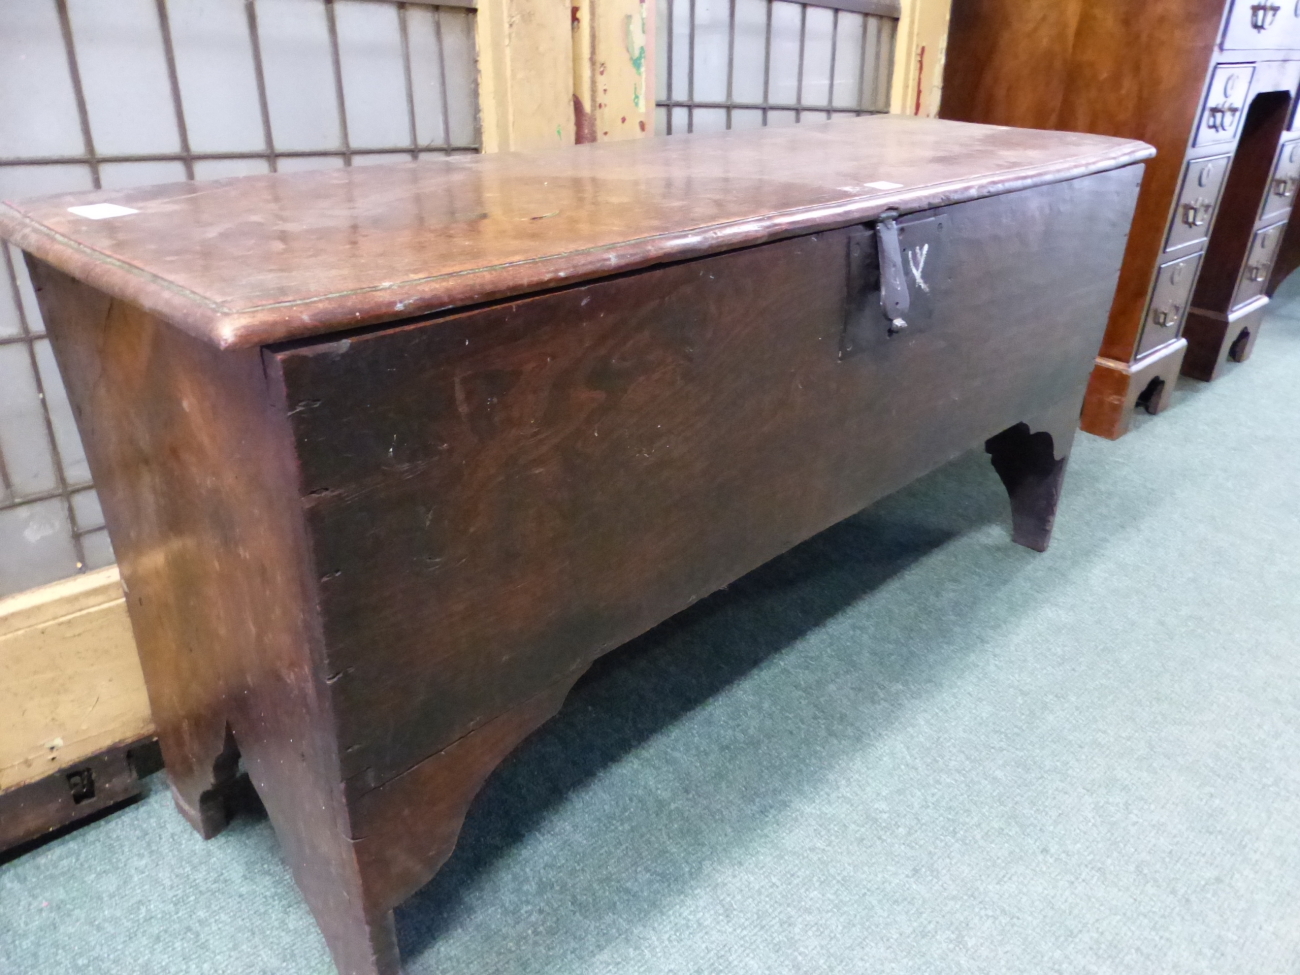 AN EARLY 18th C. OAK PLANK SIDED COFFER, THE NARROW SIDES CARVED WITH AN ARCH TO FORM THE LEGS AND - Image 2 of 4